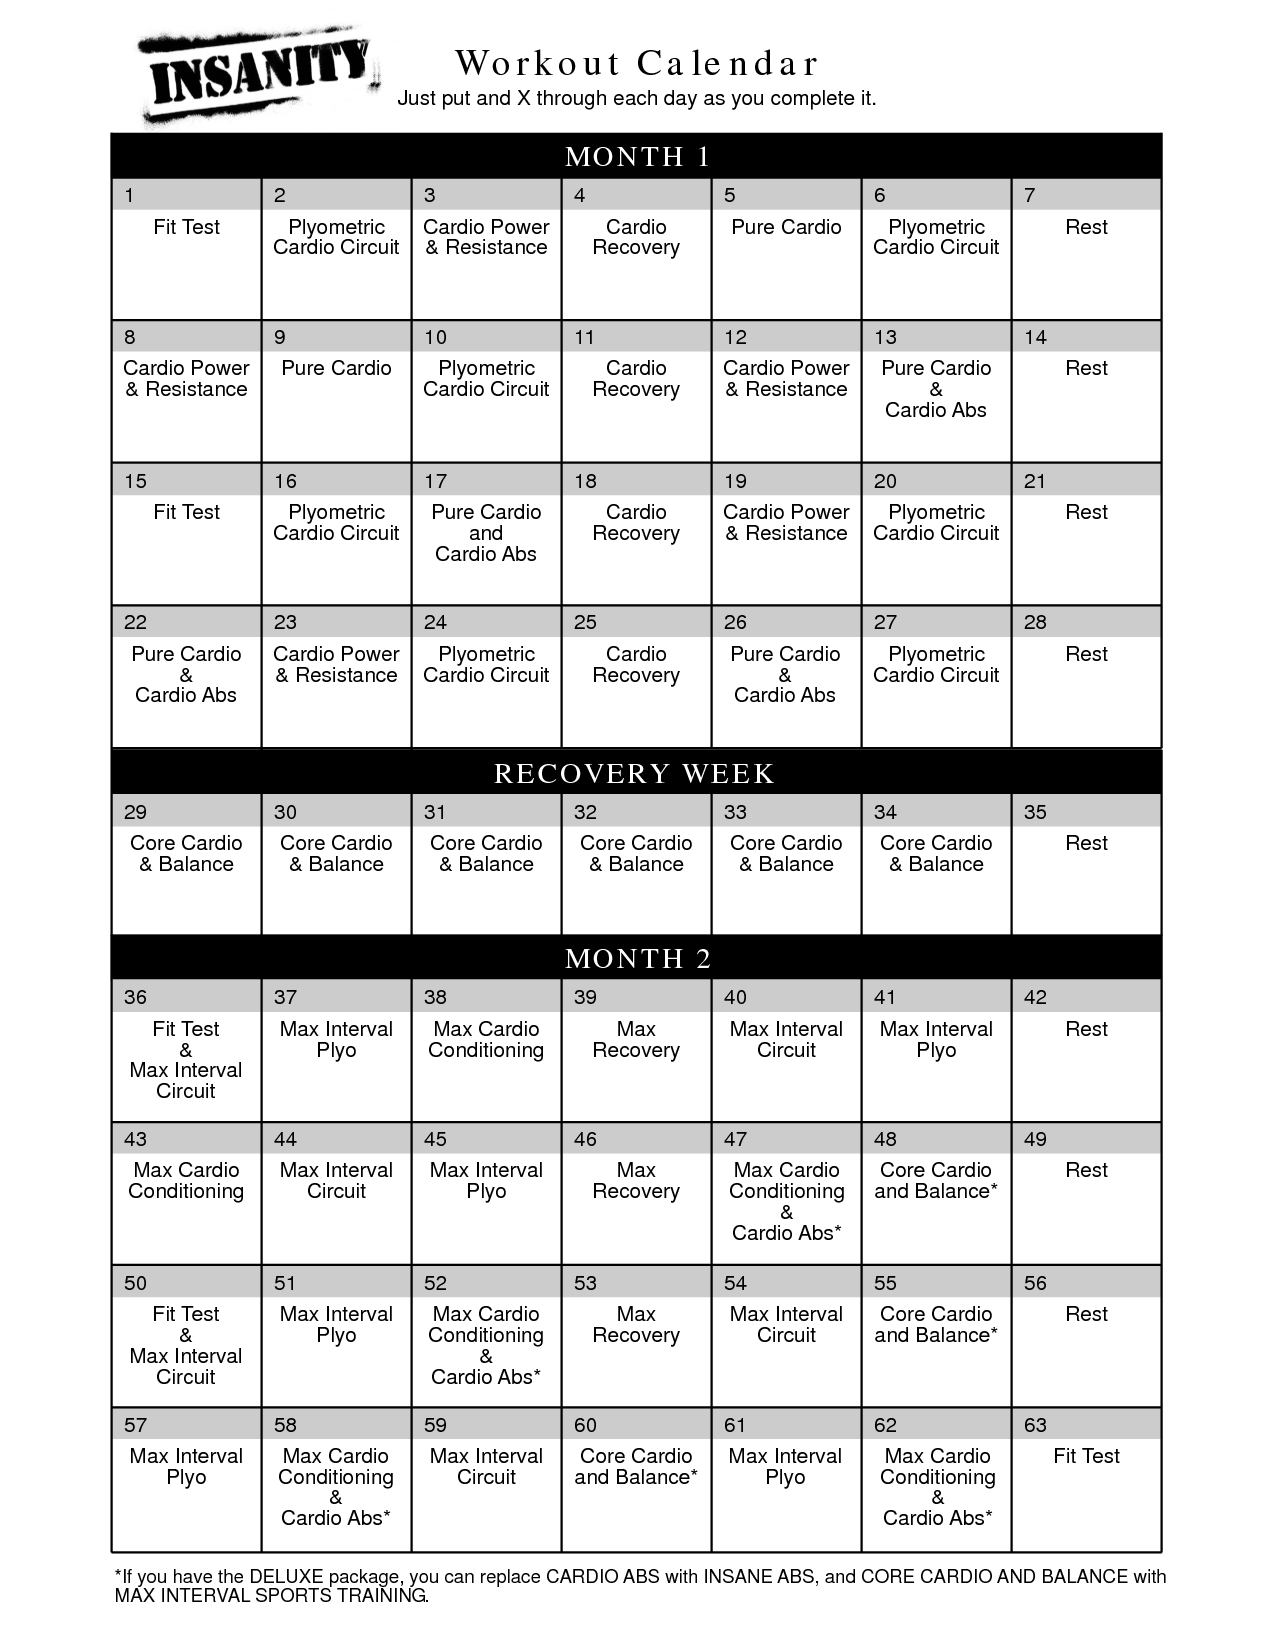 buy insanity workout